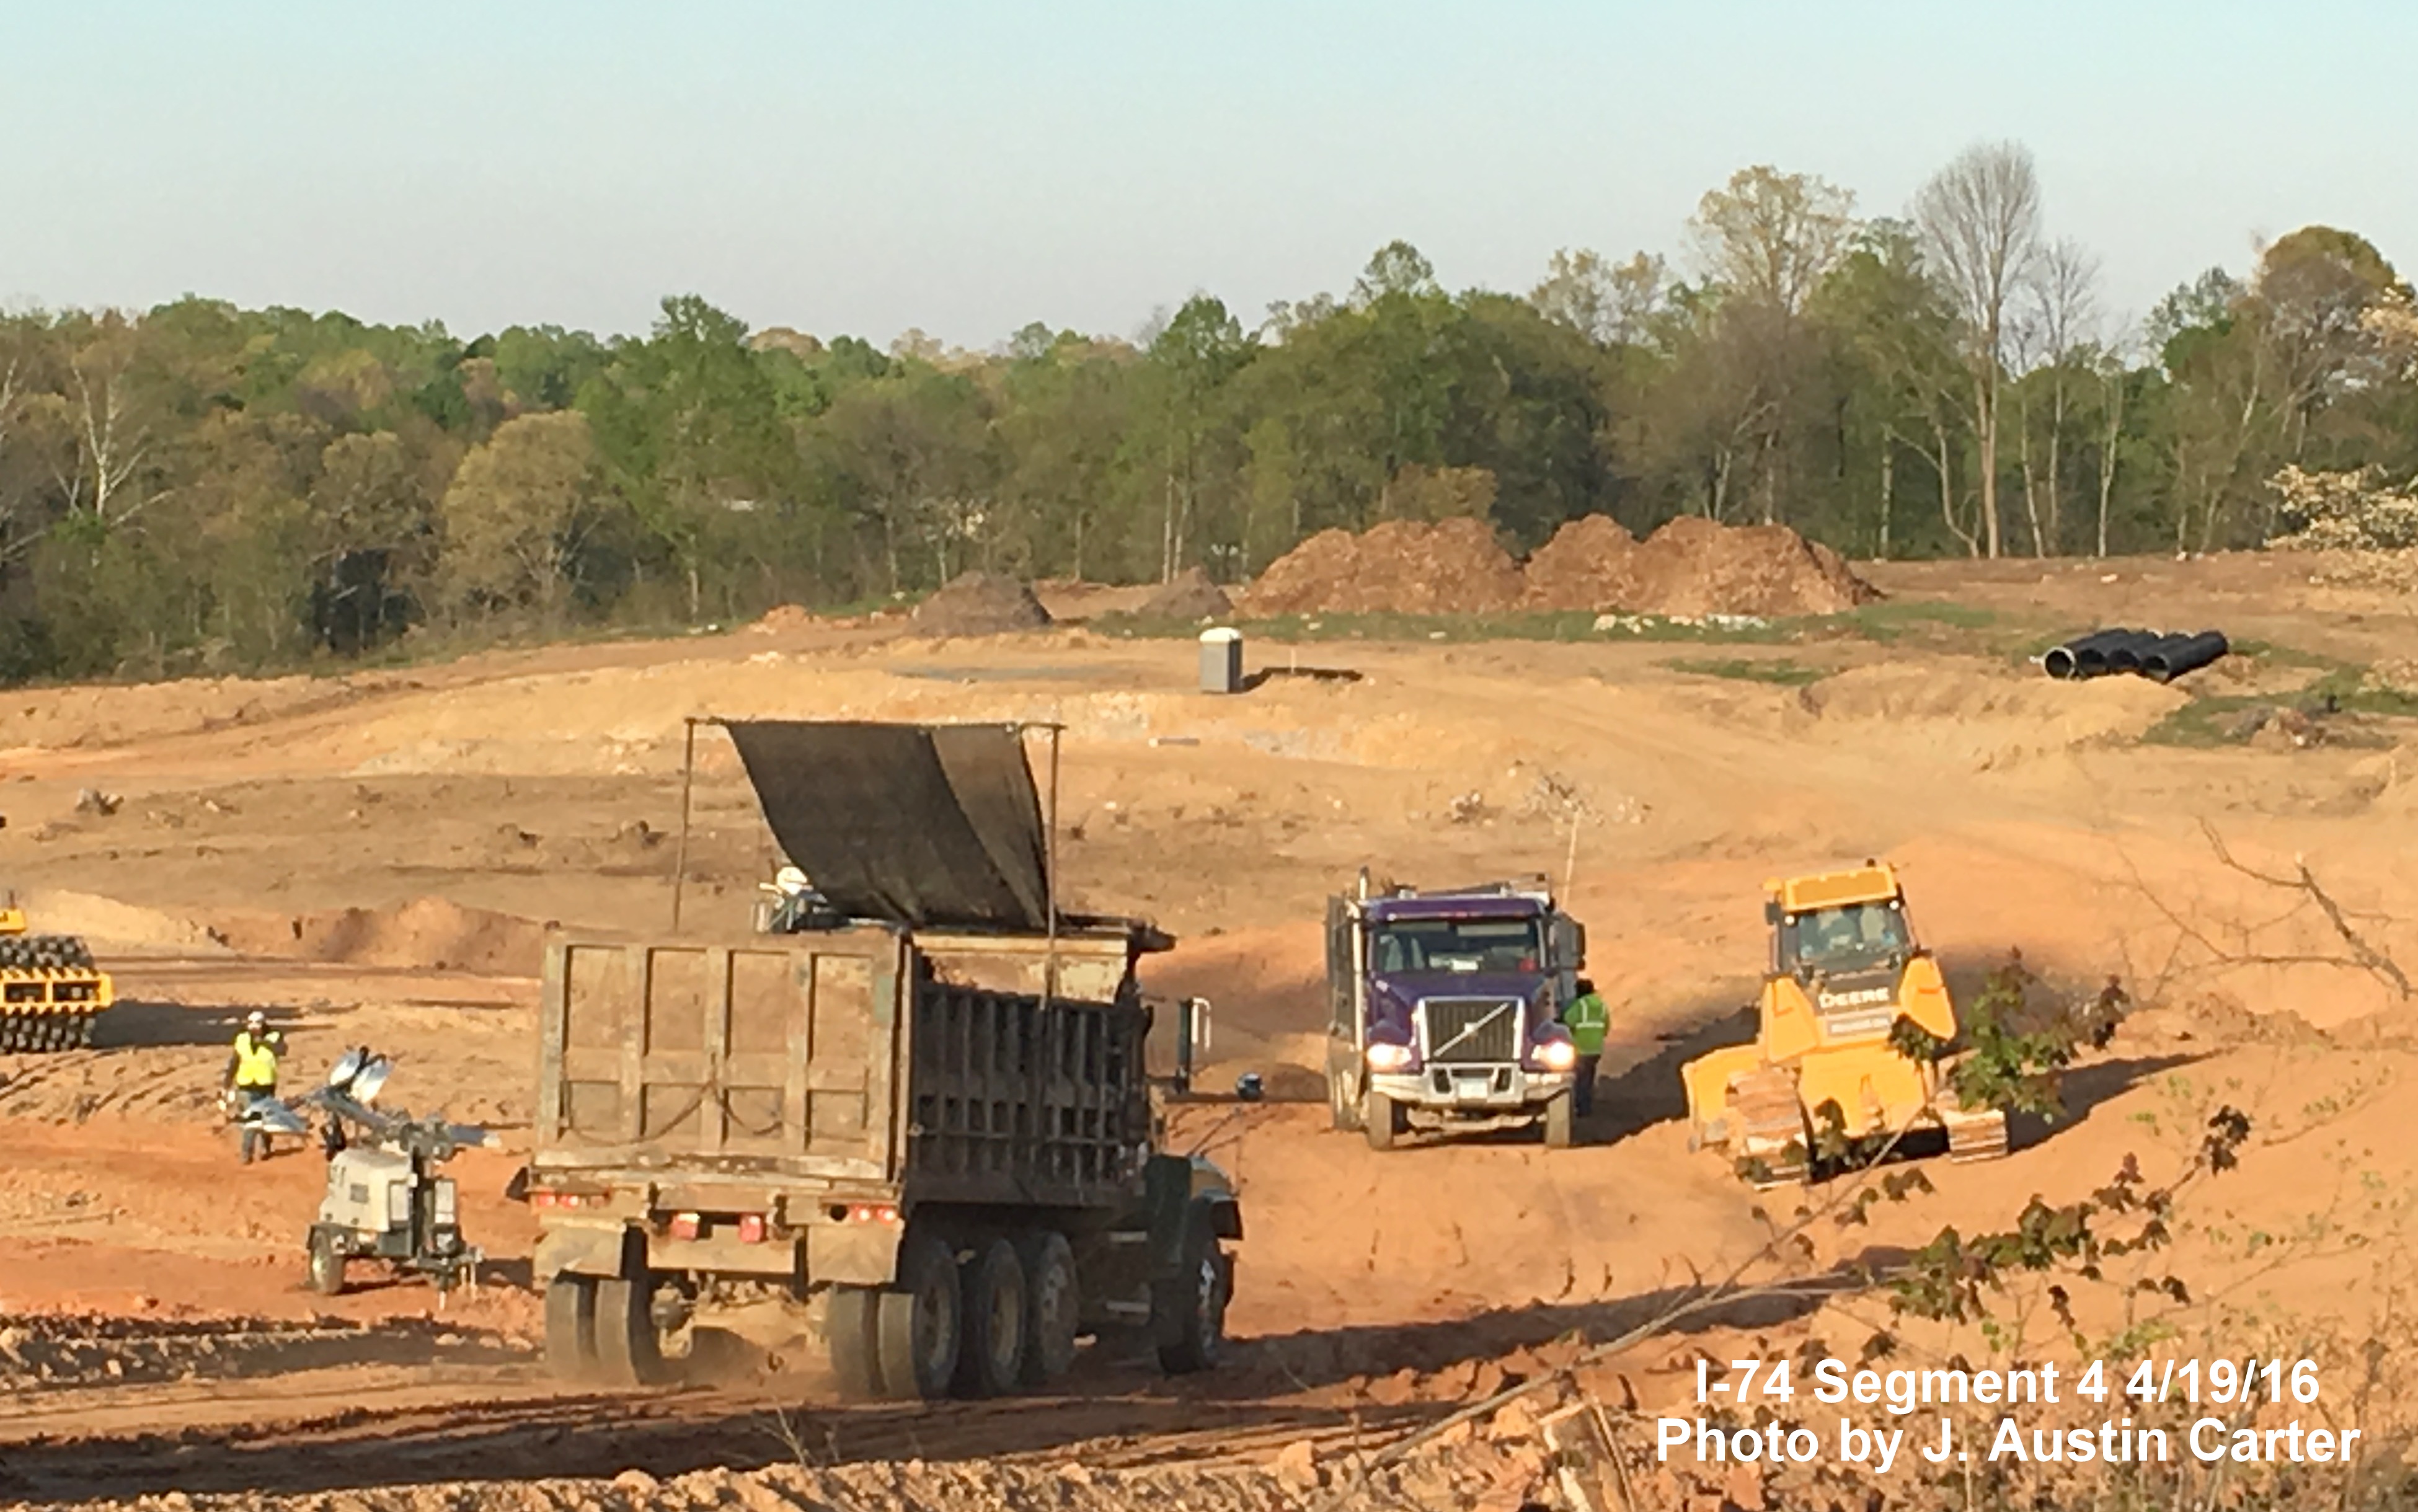 Image of construction work clearing area for new interchange between Beltway/I-74 and Business 40/US 421, 
      by J. Austin Carter